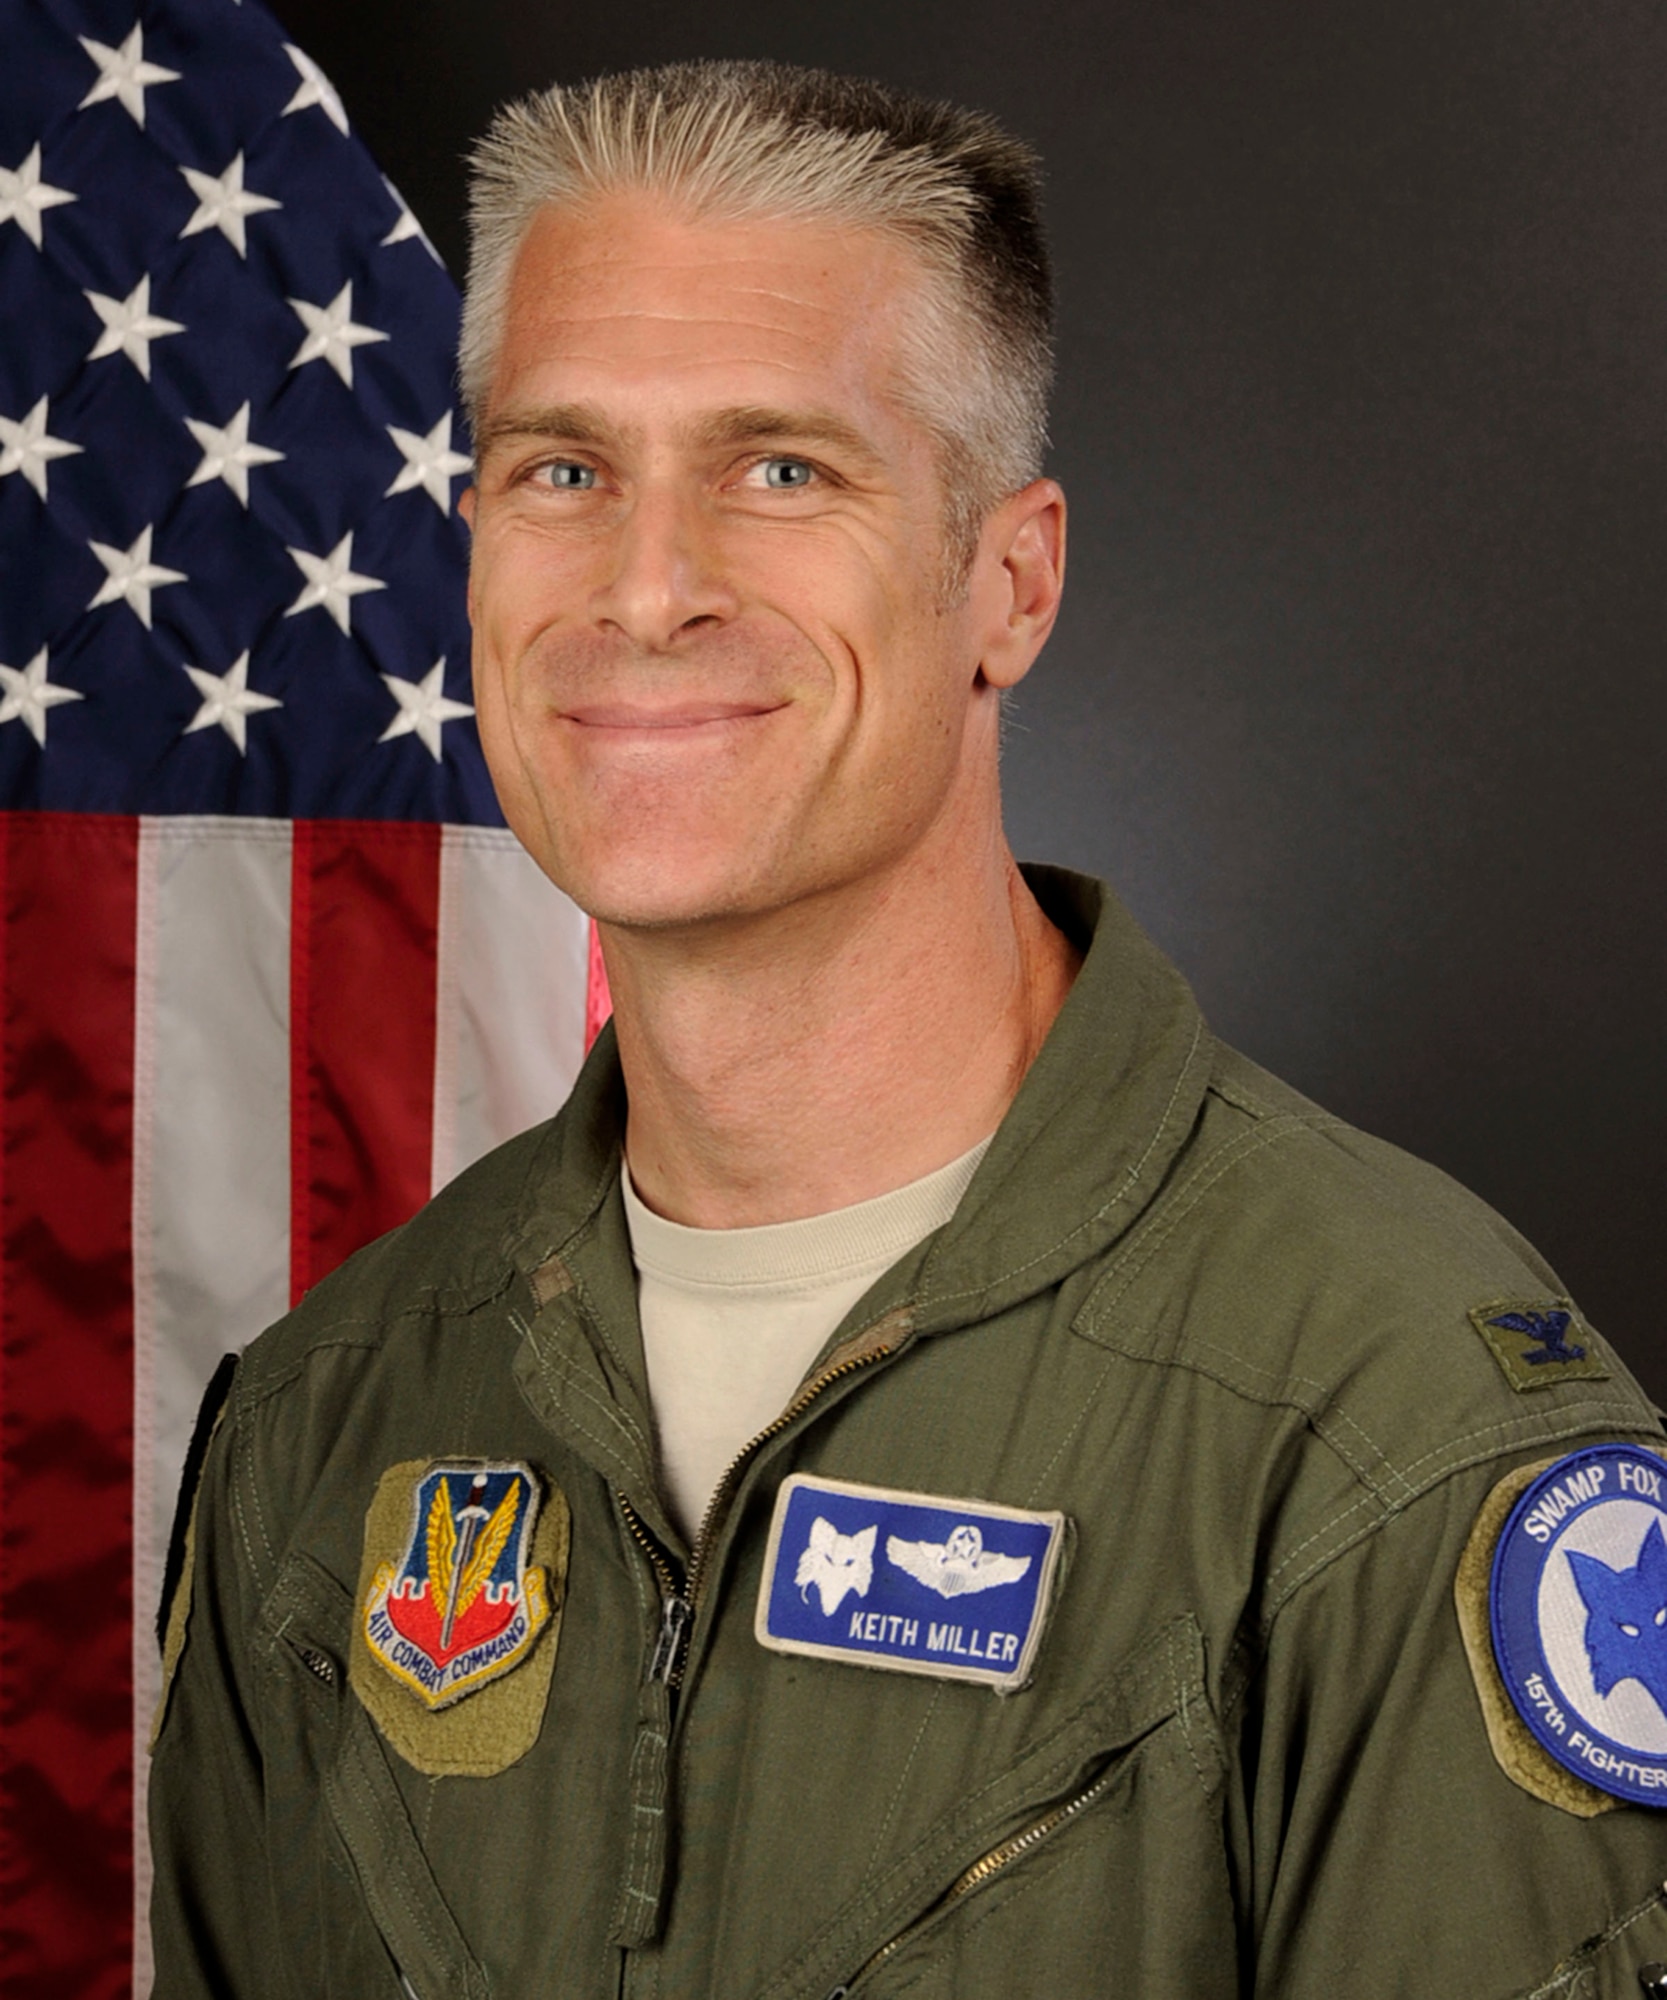 South Carolina Air National Guard portrait of U.S. Air Force Col. Keith Miller, commander of the 169th Operations Group, from McEntire Joint National Guard Base, S.C., September 30, 2015. (U.S. Air National Guard photo by Airman Megan Floyd/Released)